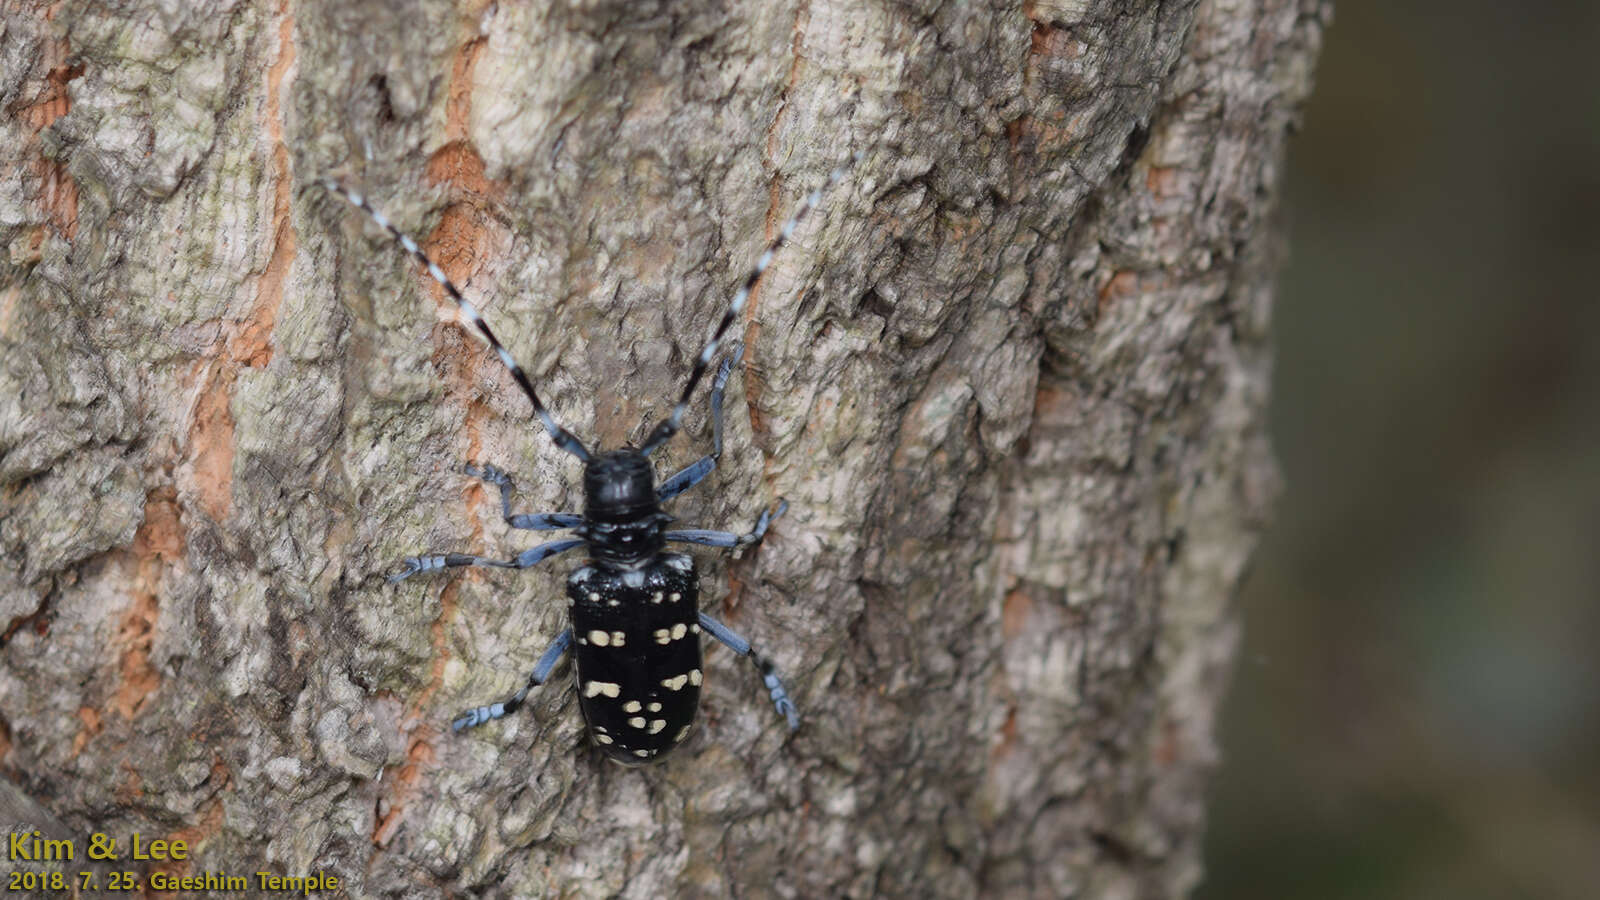 Image of Citrus long-horned beetle